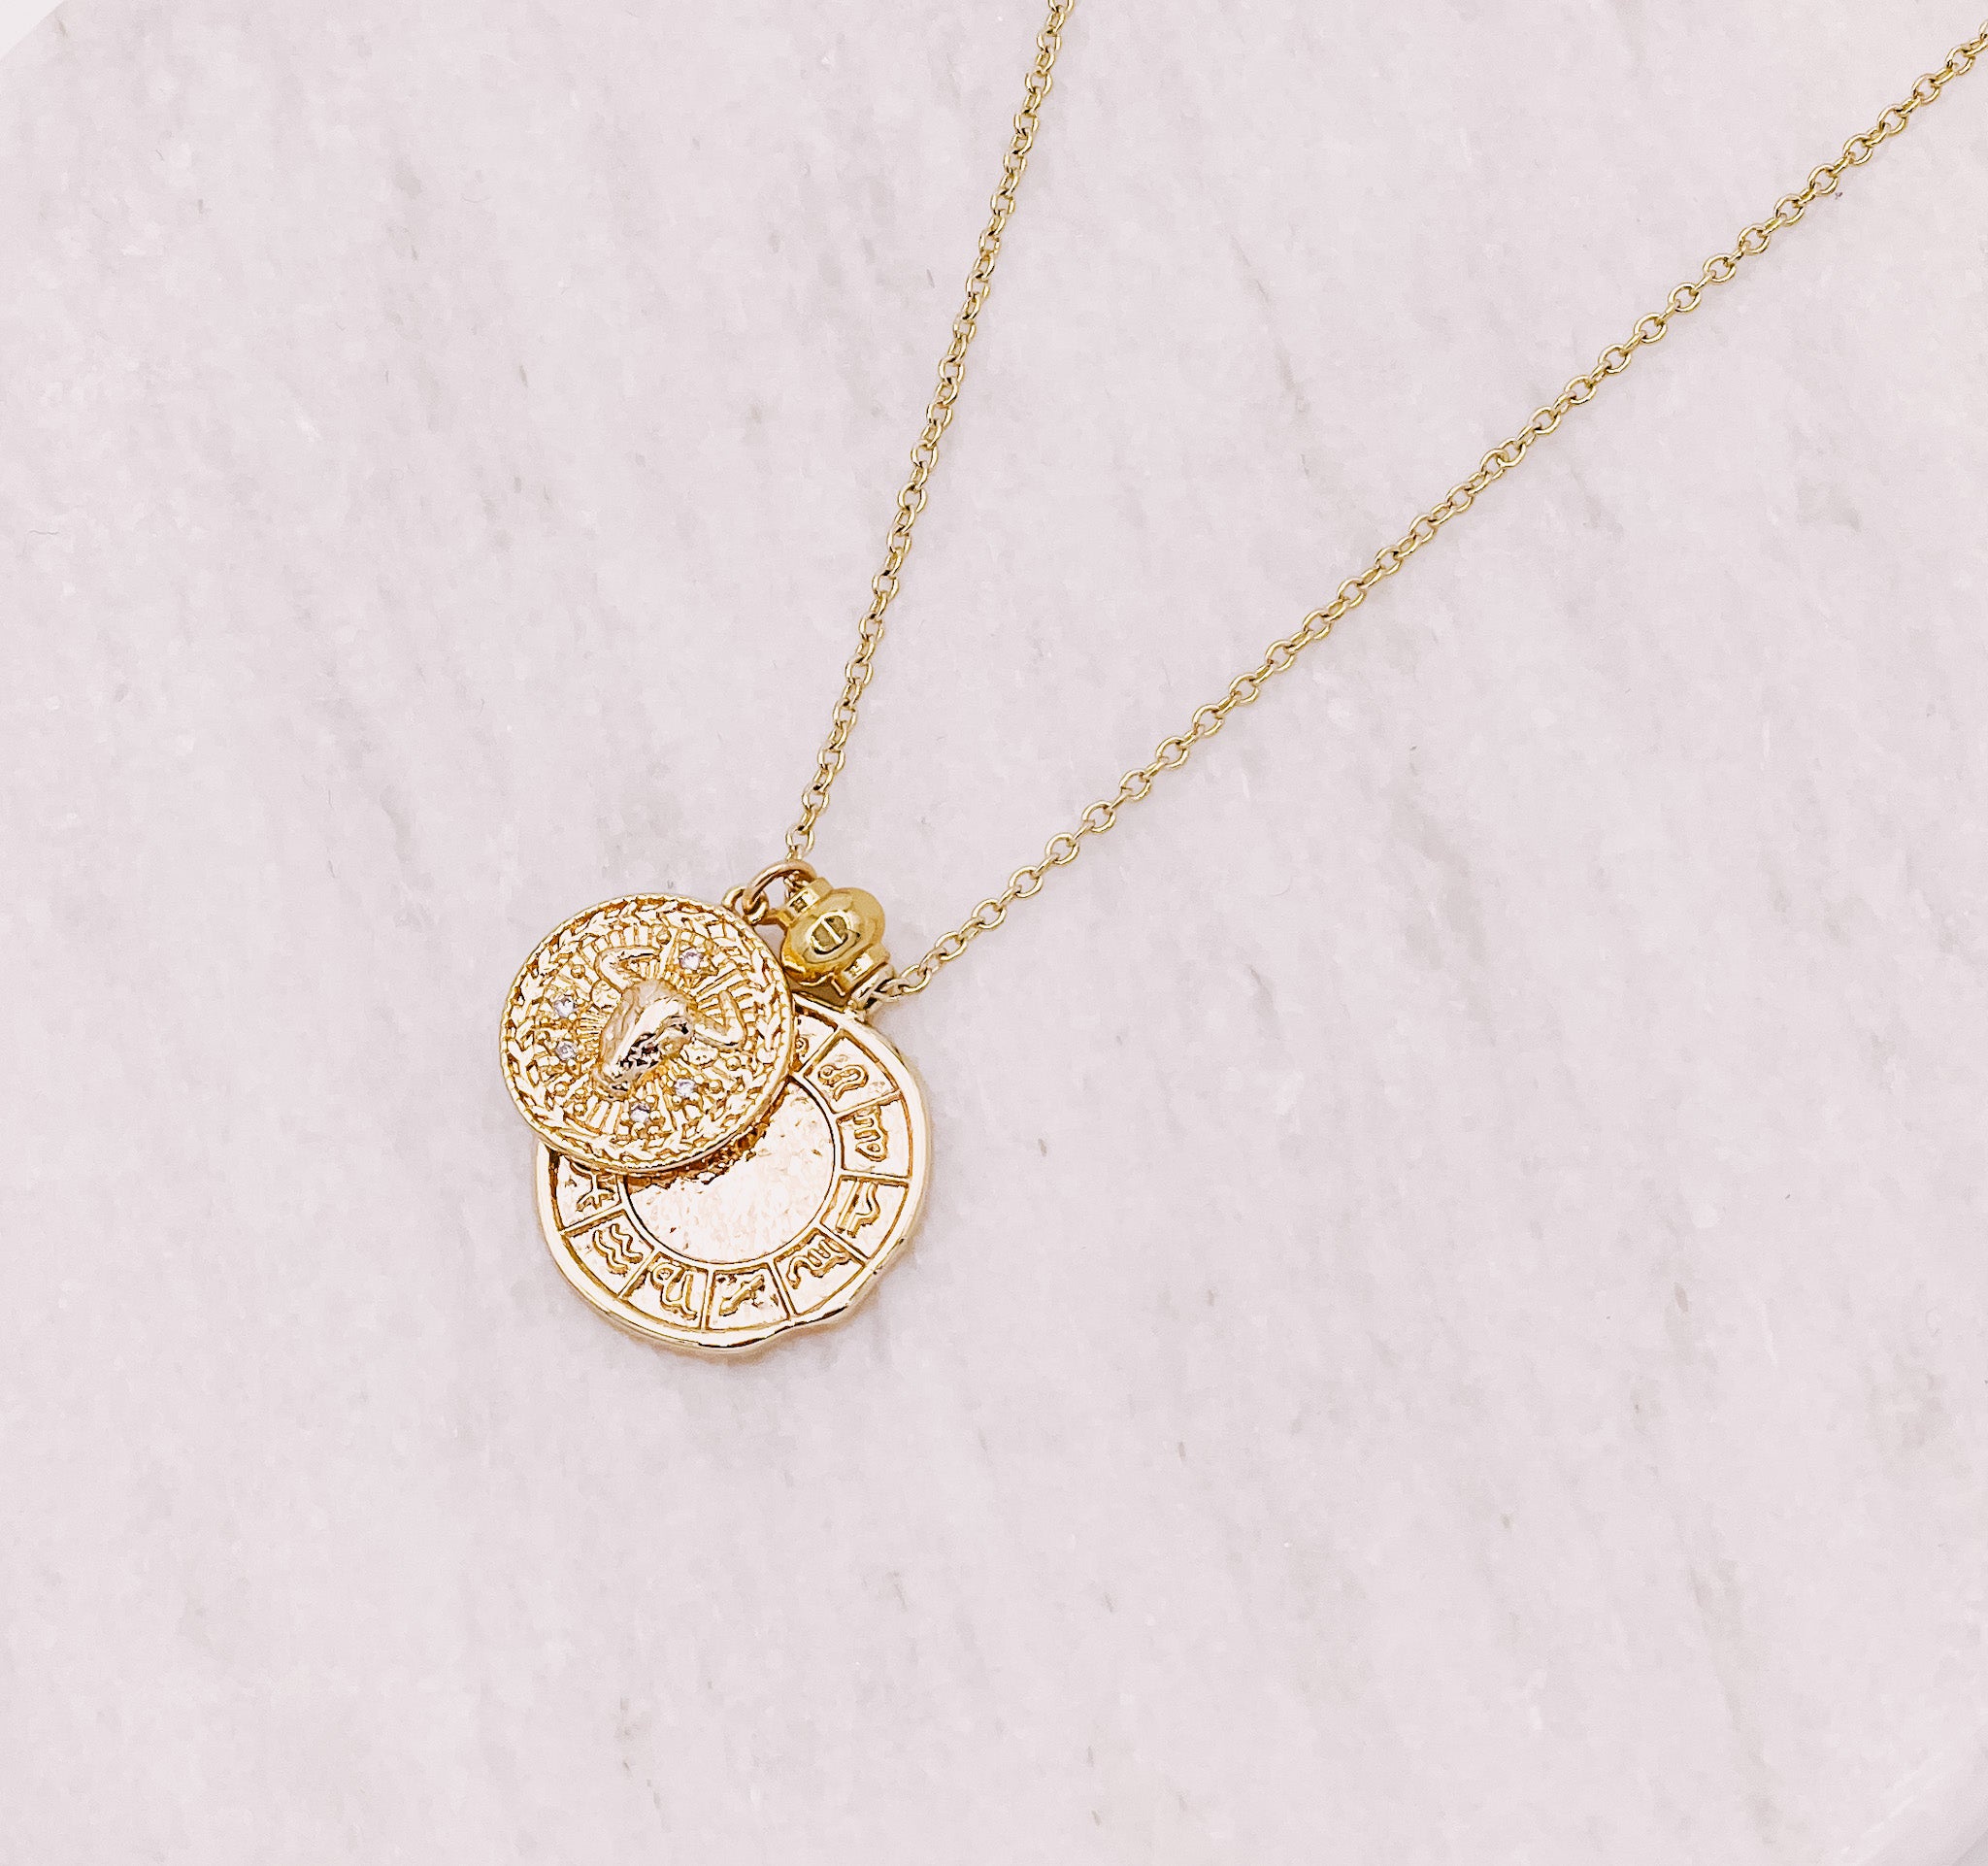 Gold filled zodiac star sign coin charm necklace. Australian jewellery brand AW Boutique. Part of the Celestial Collection. Necklace option shown is Taurus.